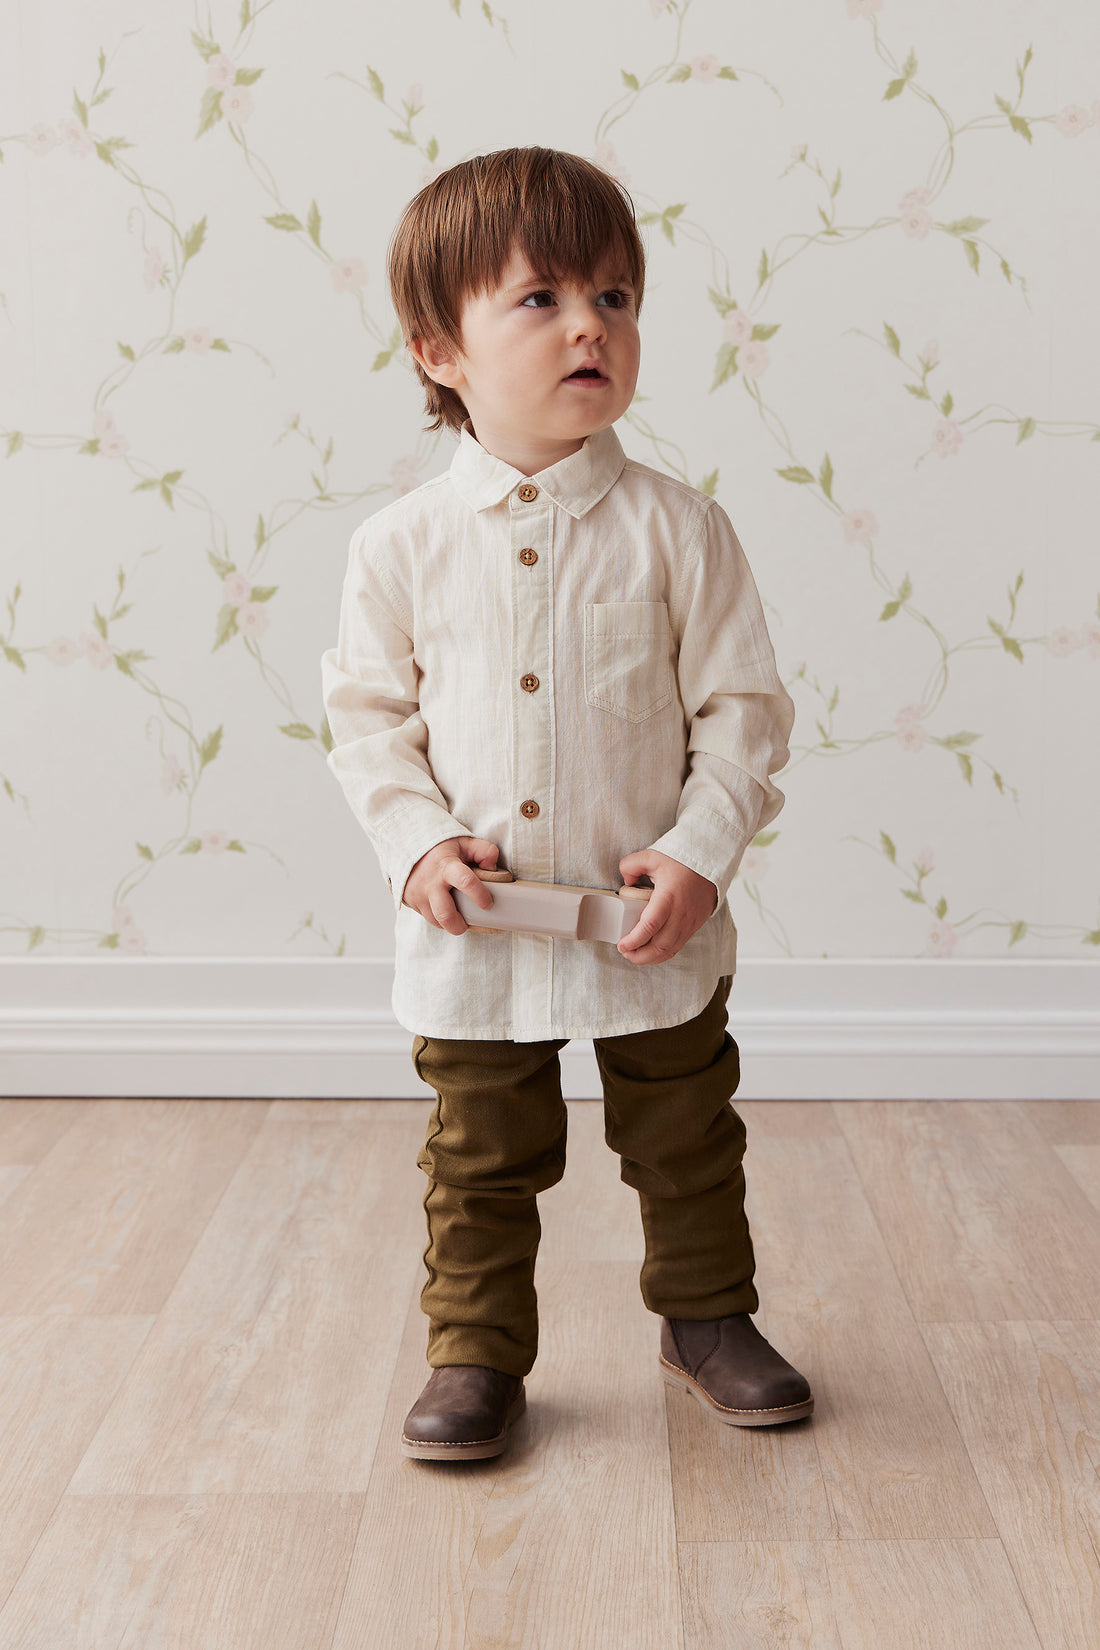 Austin Woven Pant - Dark Anise Childrens Pant from Jamie Kay NZ